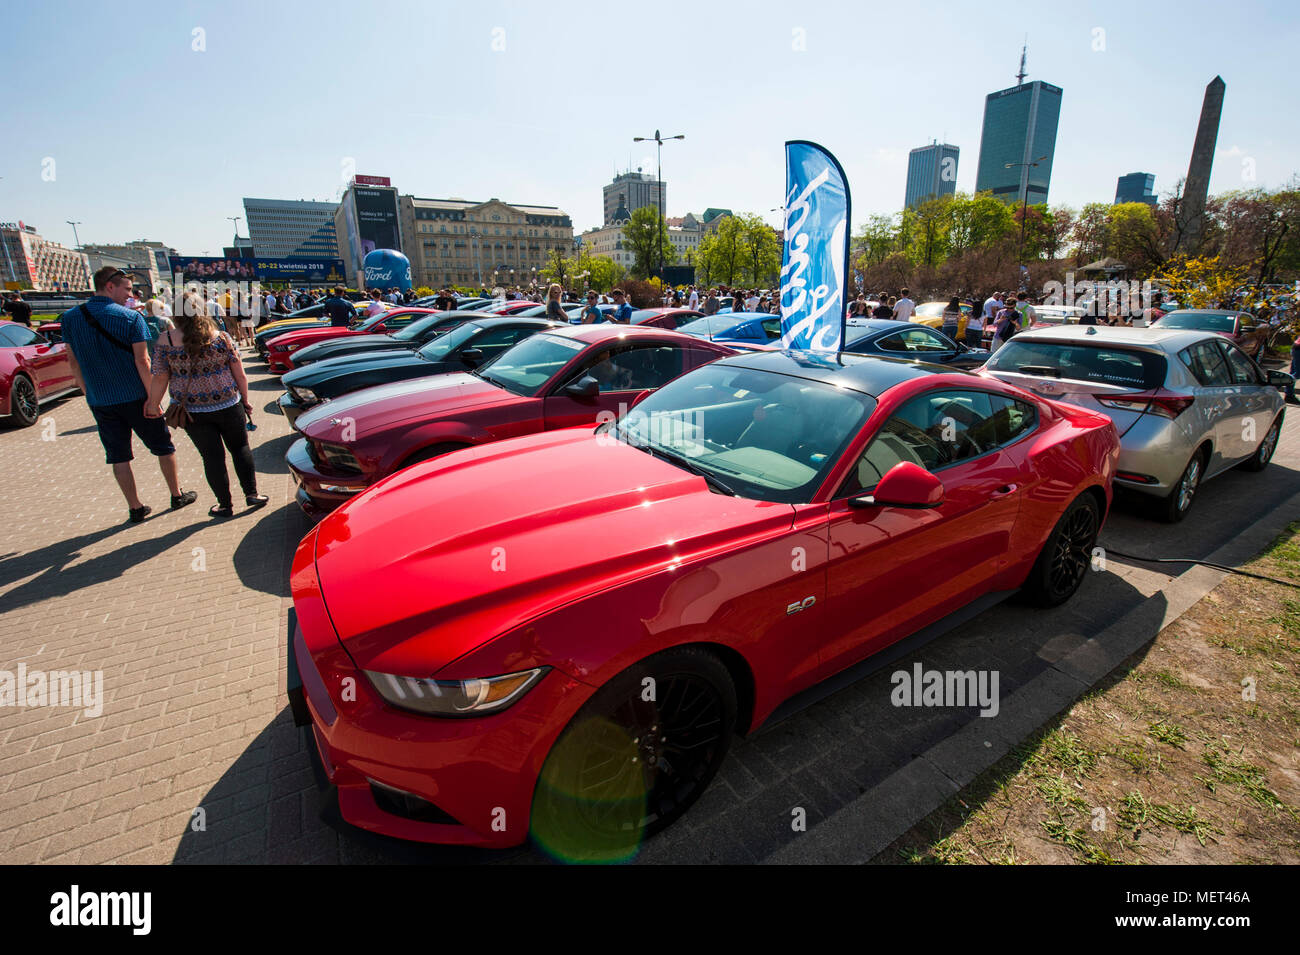 A national meet of motorcar lovers in the very center of Warsaw, Poland.  The Parade Square, Plac Defilad, Warszawa Stock Photo - Alamy